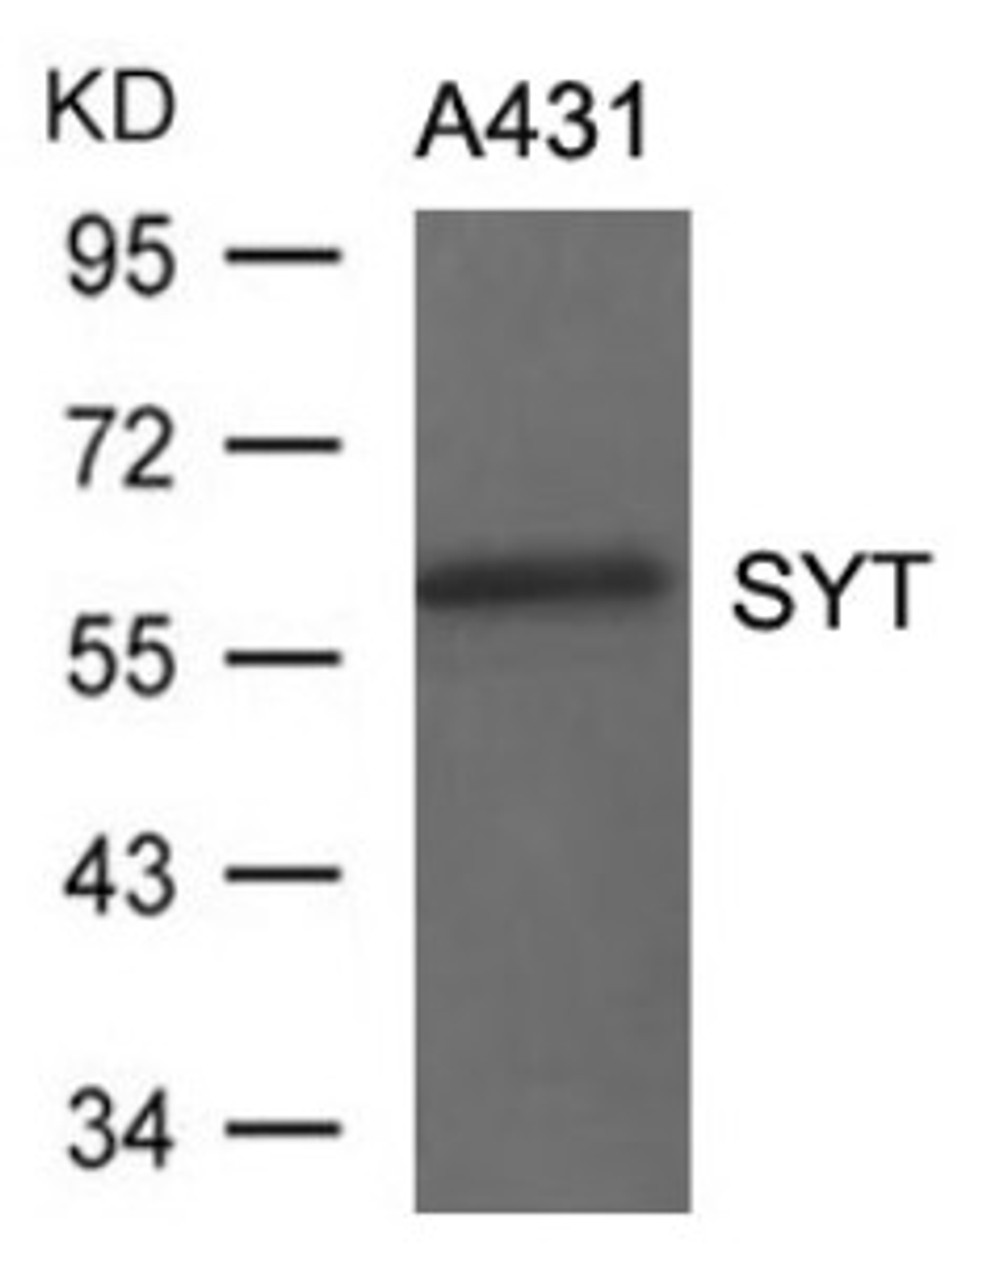 Western blot analysis of lysed extracts from A431 cells using SYT Antibody.